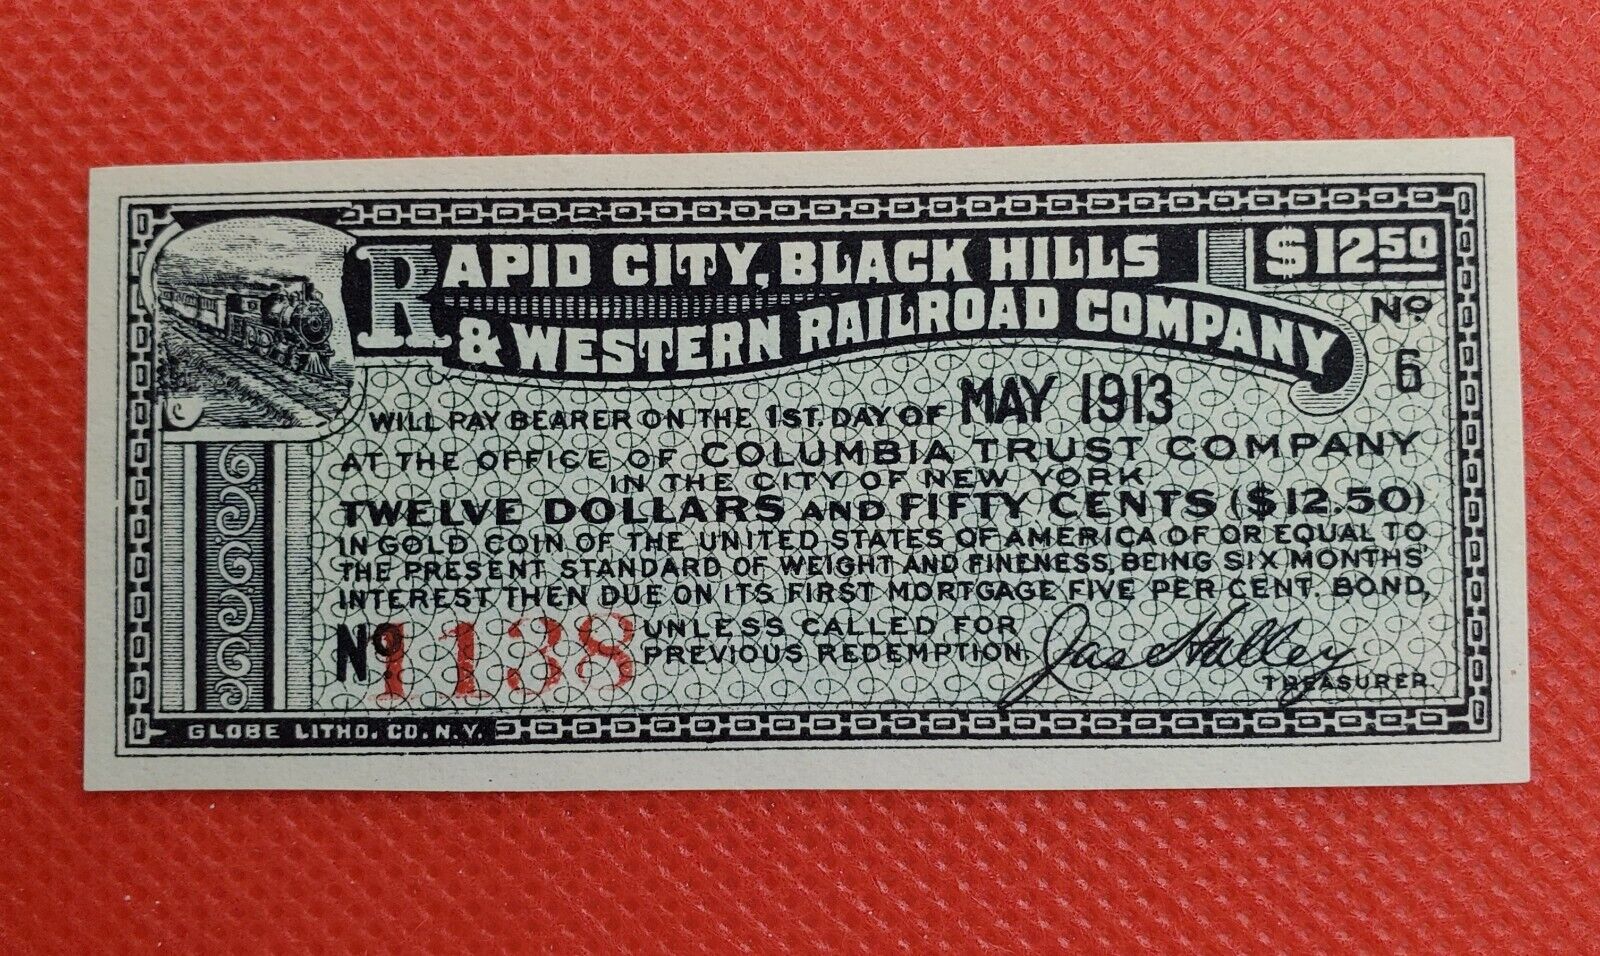 1913 $12.50 Rapid City Black Hills & Western Railroad Company Redeemable in GOLD